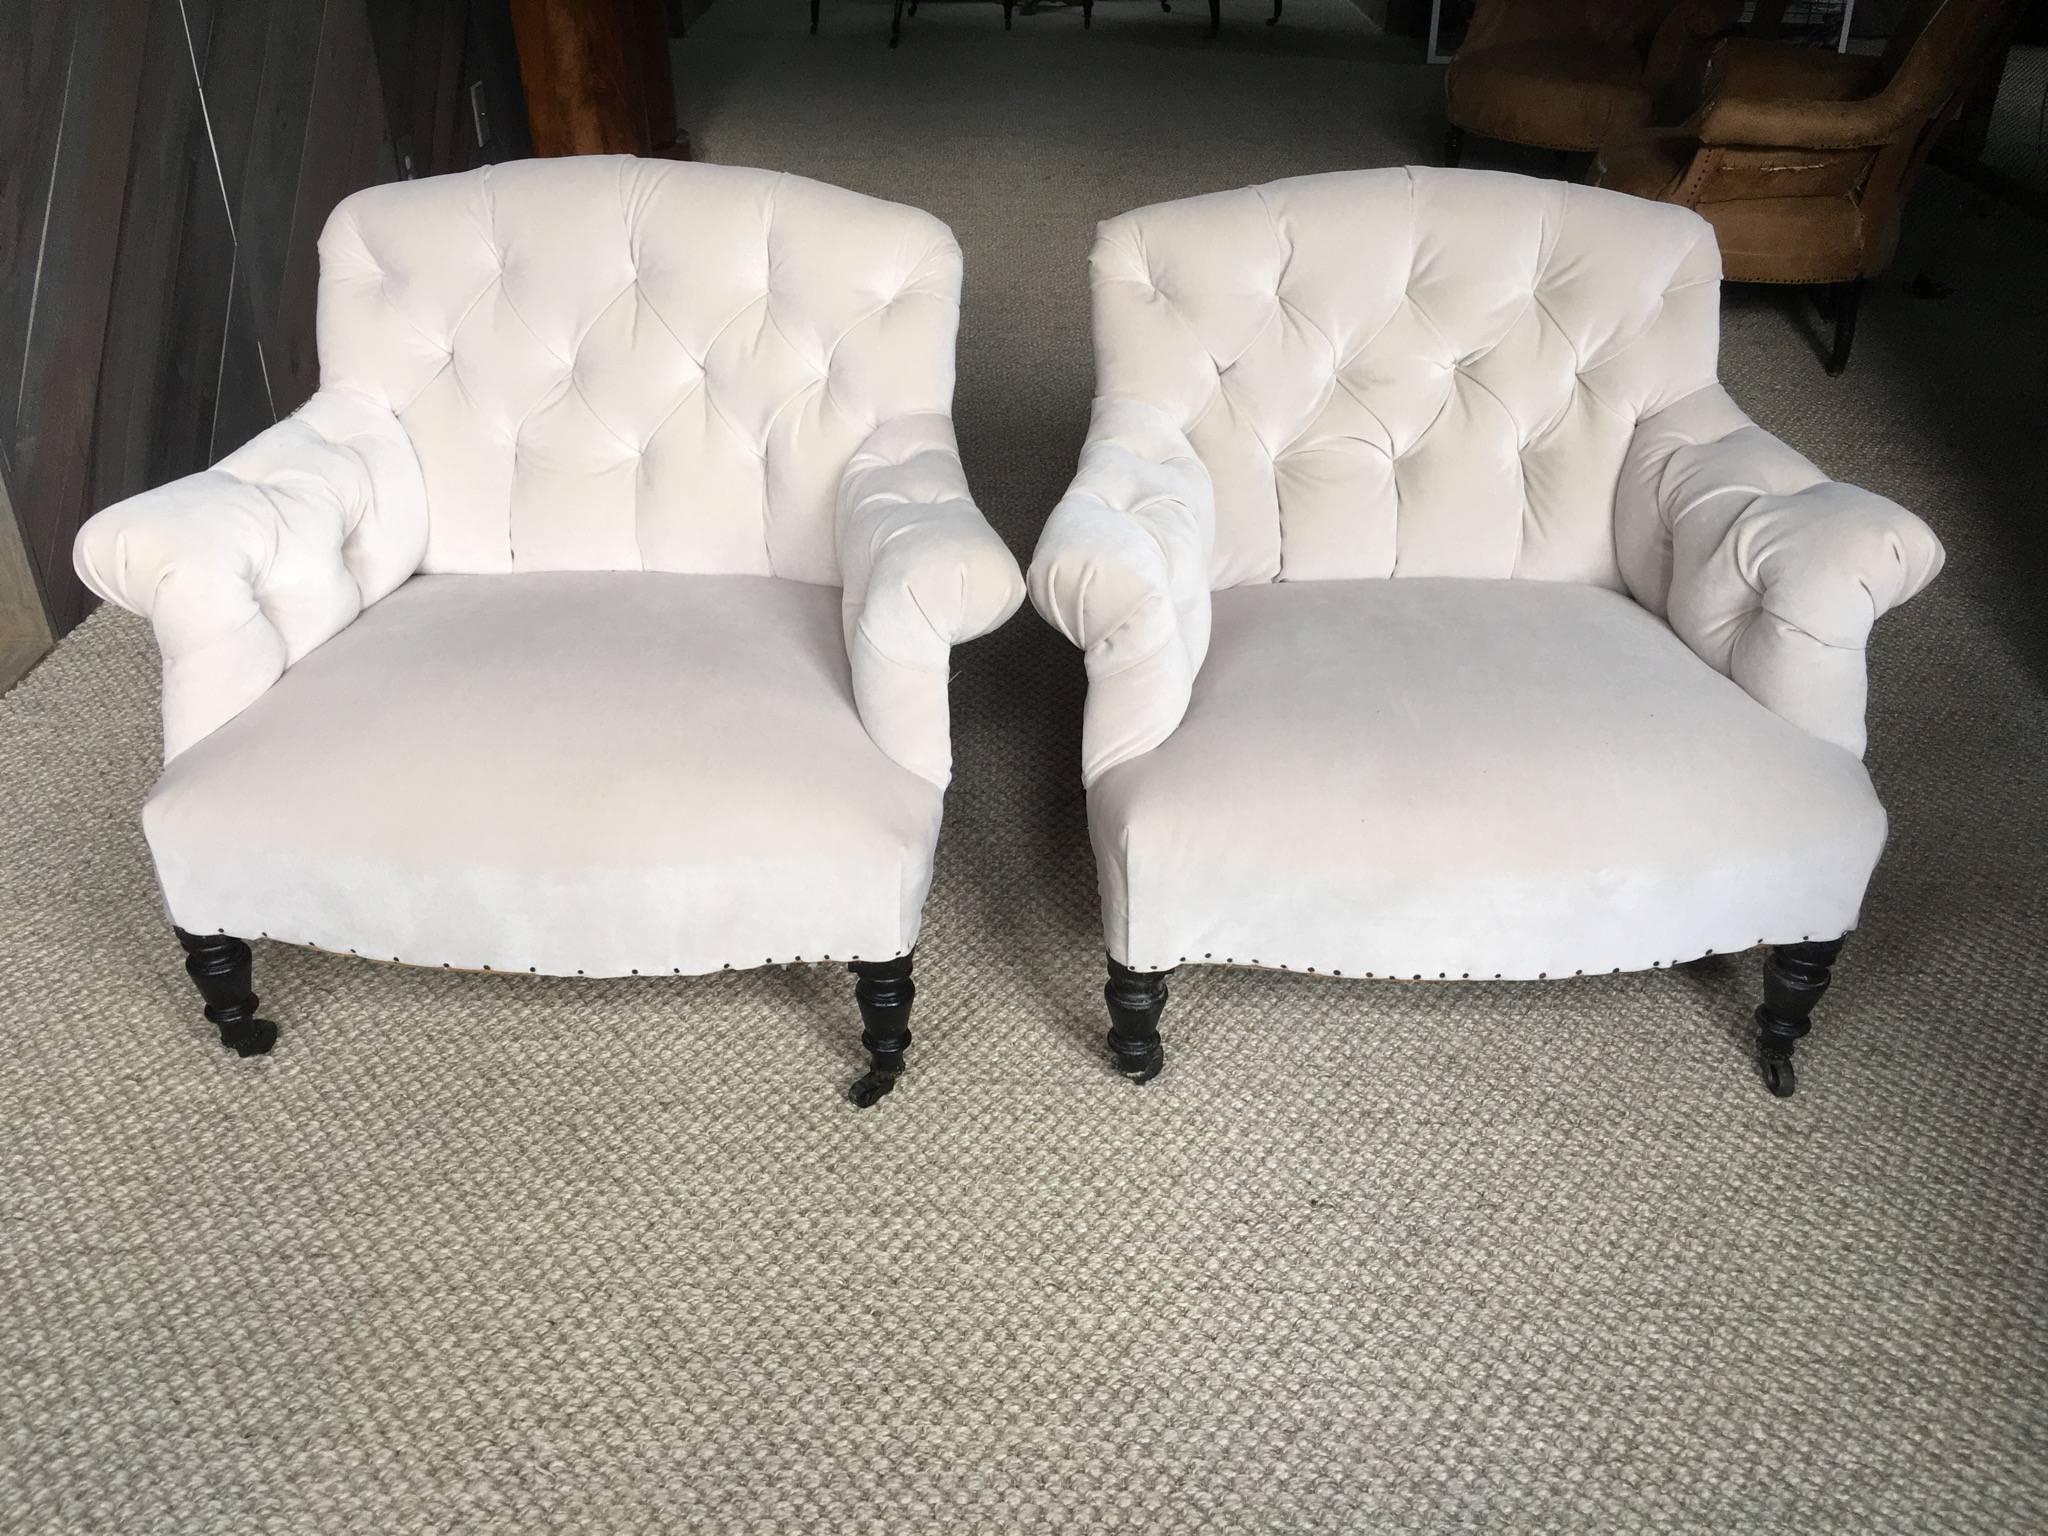 Pair of fabulous antique French tufted salon chairs upholstered in "cement" velvet leaving the backs and side framework exposed to show architecture, age and authenticity. Priced separately.